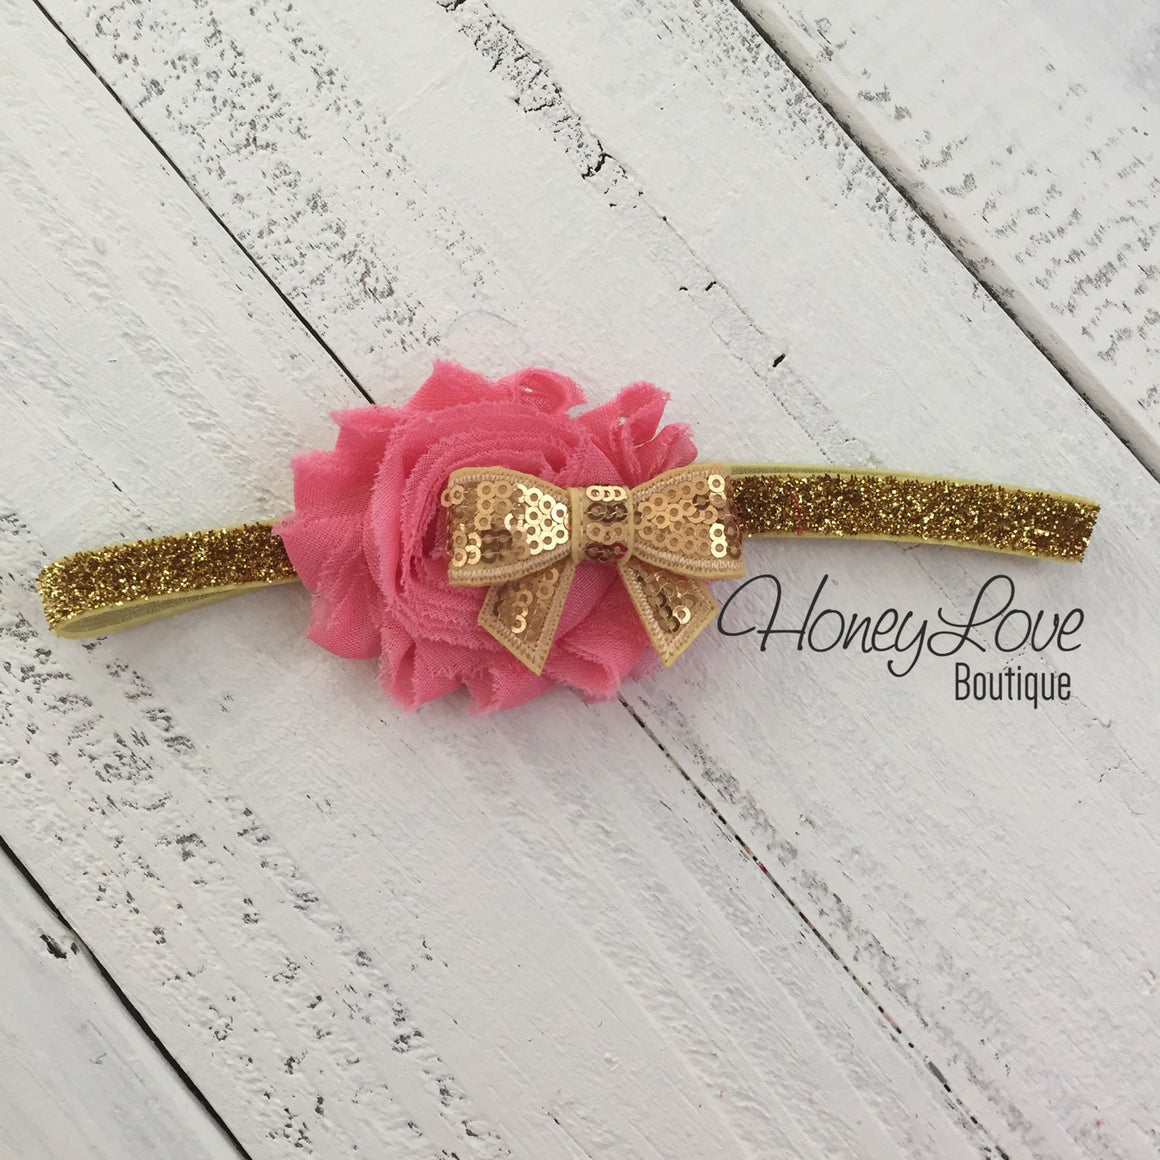 PERSONALIZED Name Outfit - Gold Glitter and Coral Pink - HoneyLoveBoutique